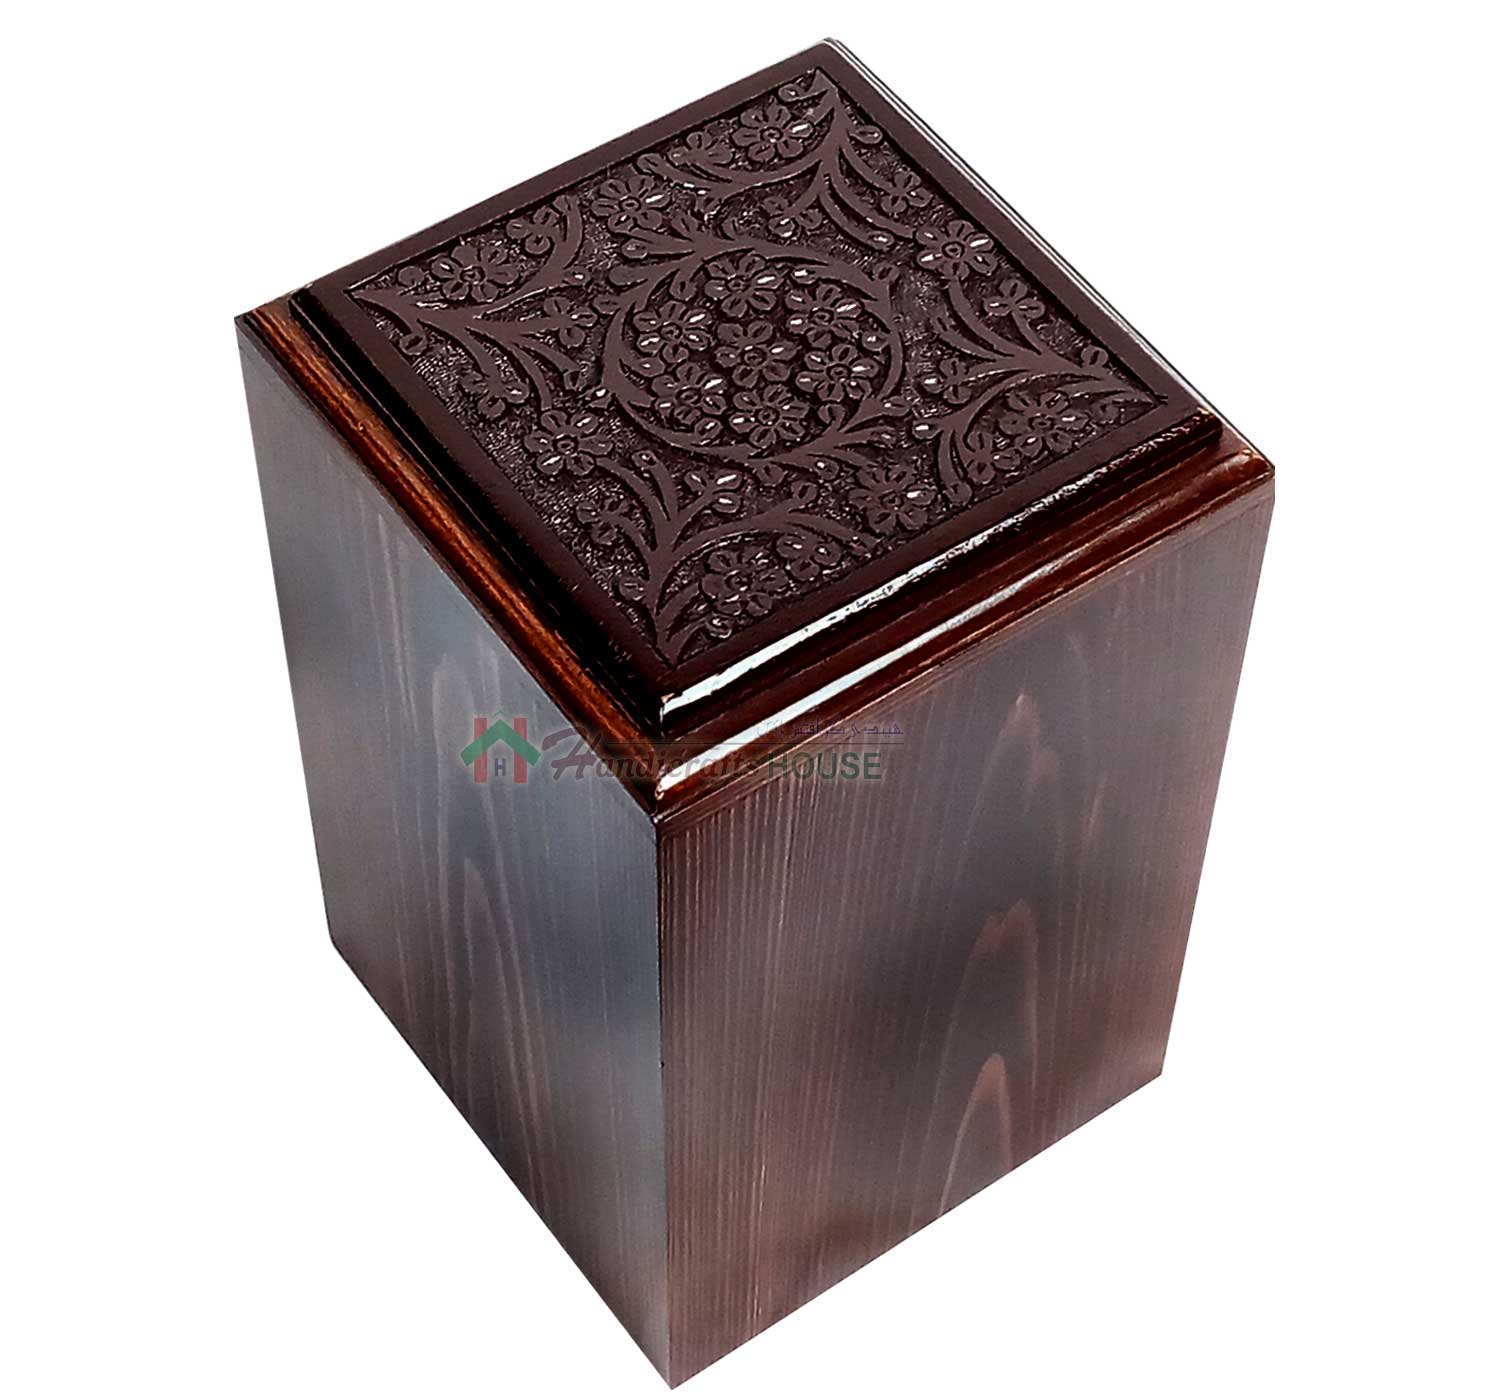 Wooden Box For Human Ashes, Wood Burial Adult Urns, Decorative Keepsake Urn, Timber Tableware